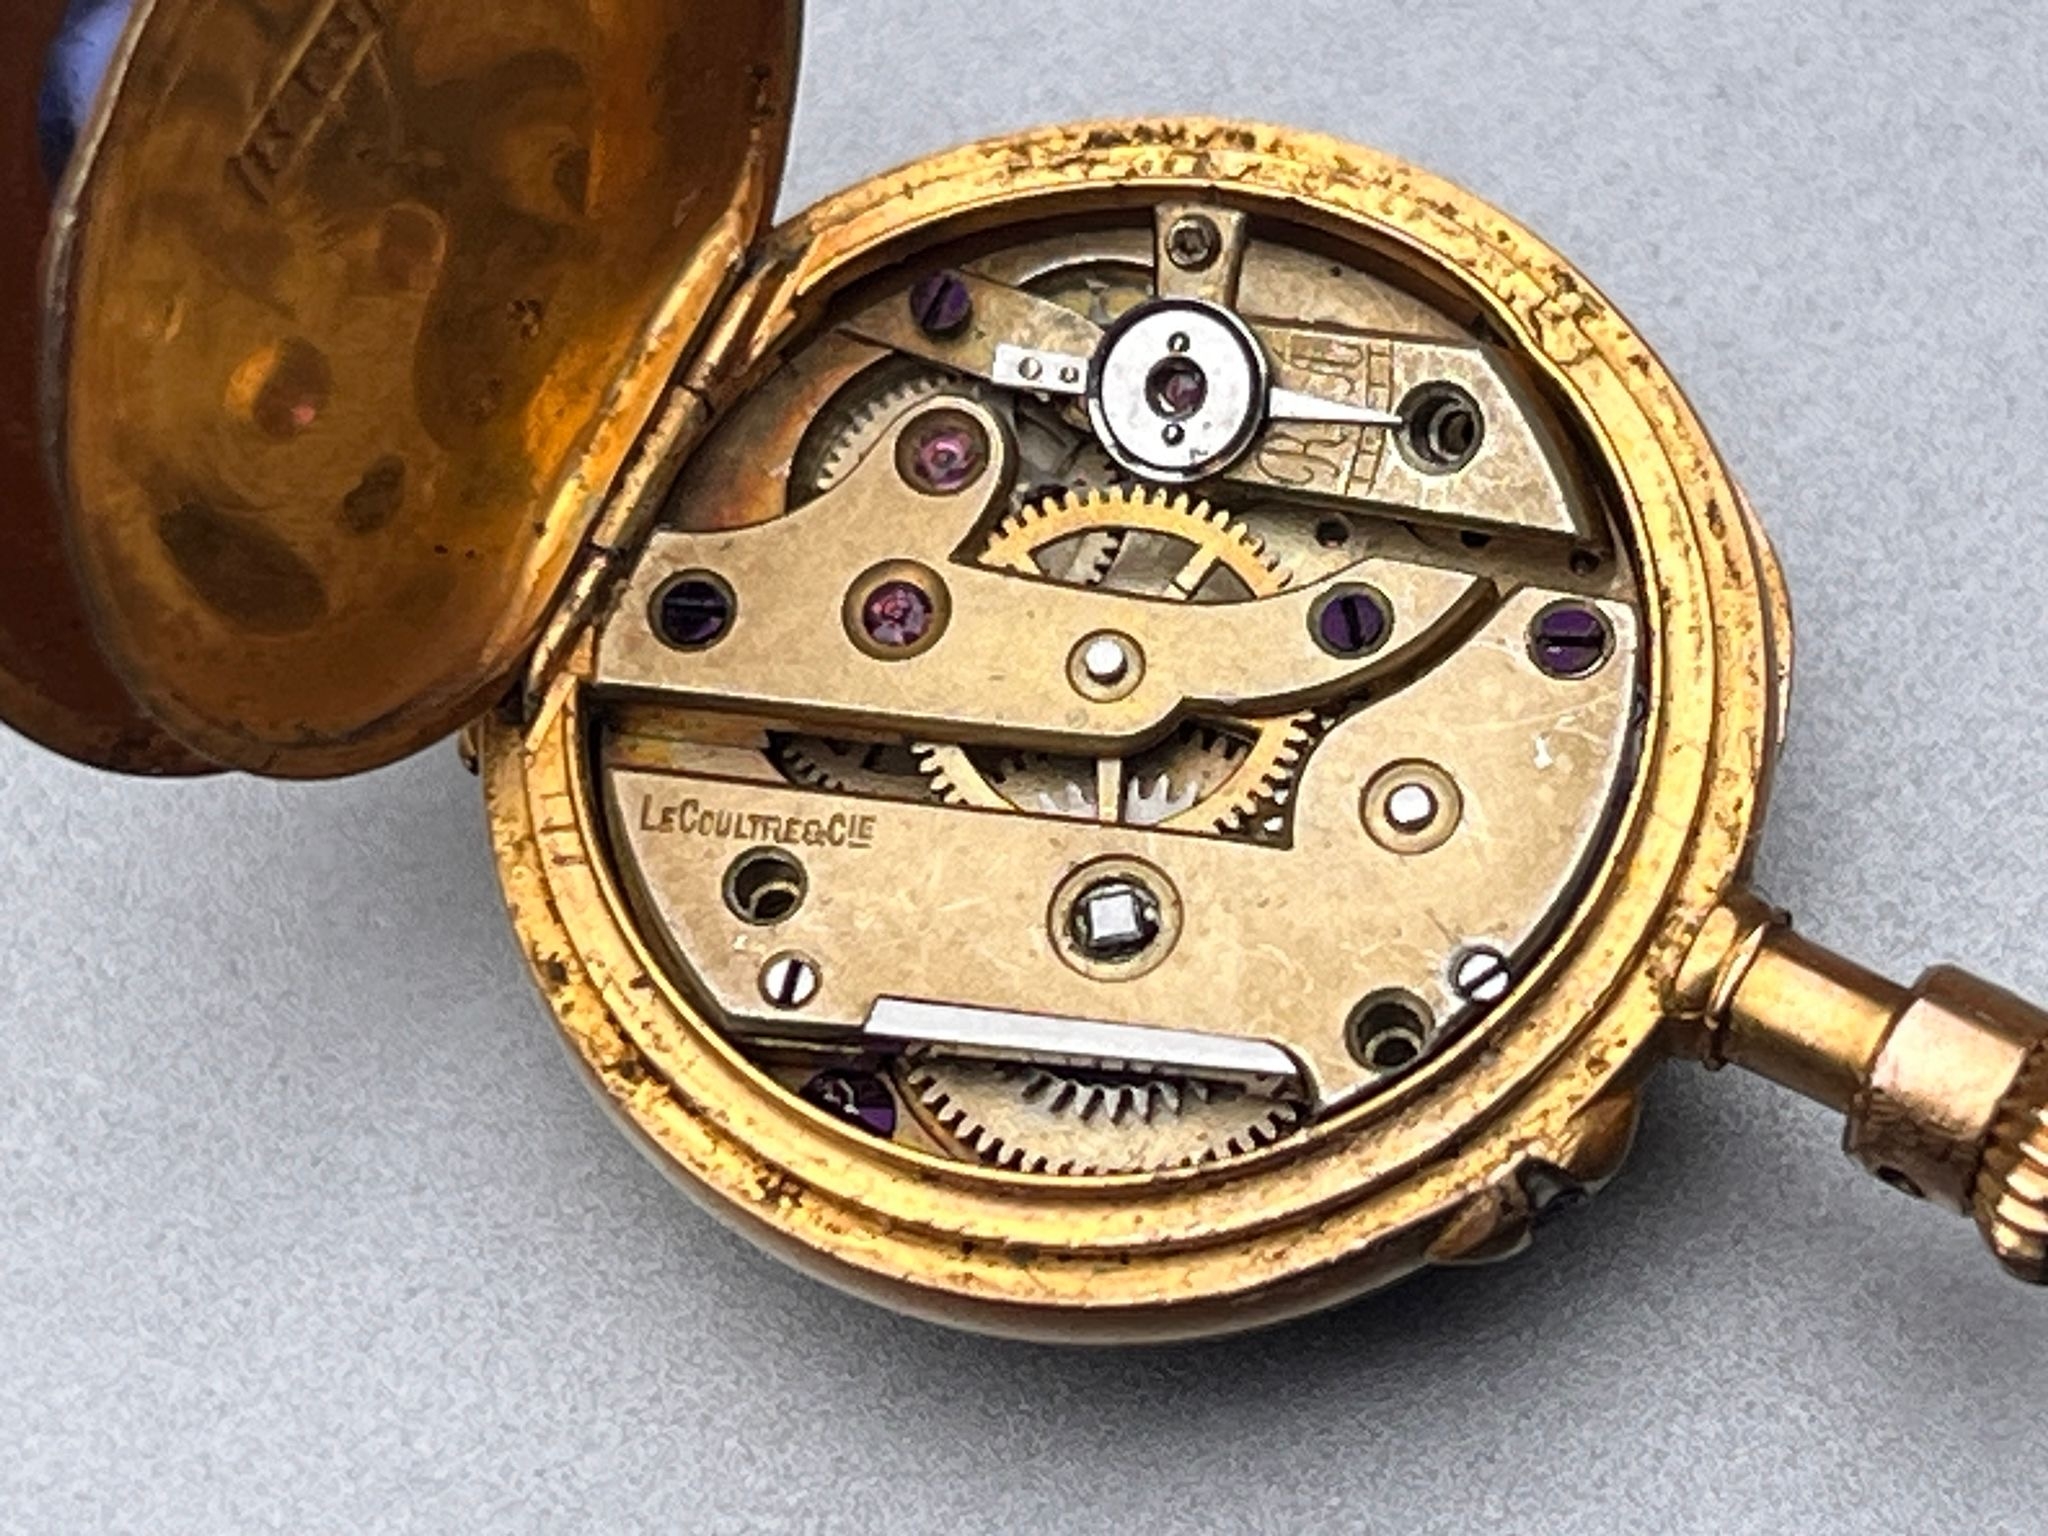 Miniature 18ct gold leCoultre pocket watch weight 9 gms the watch is not ticking - Image 5 of 6